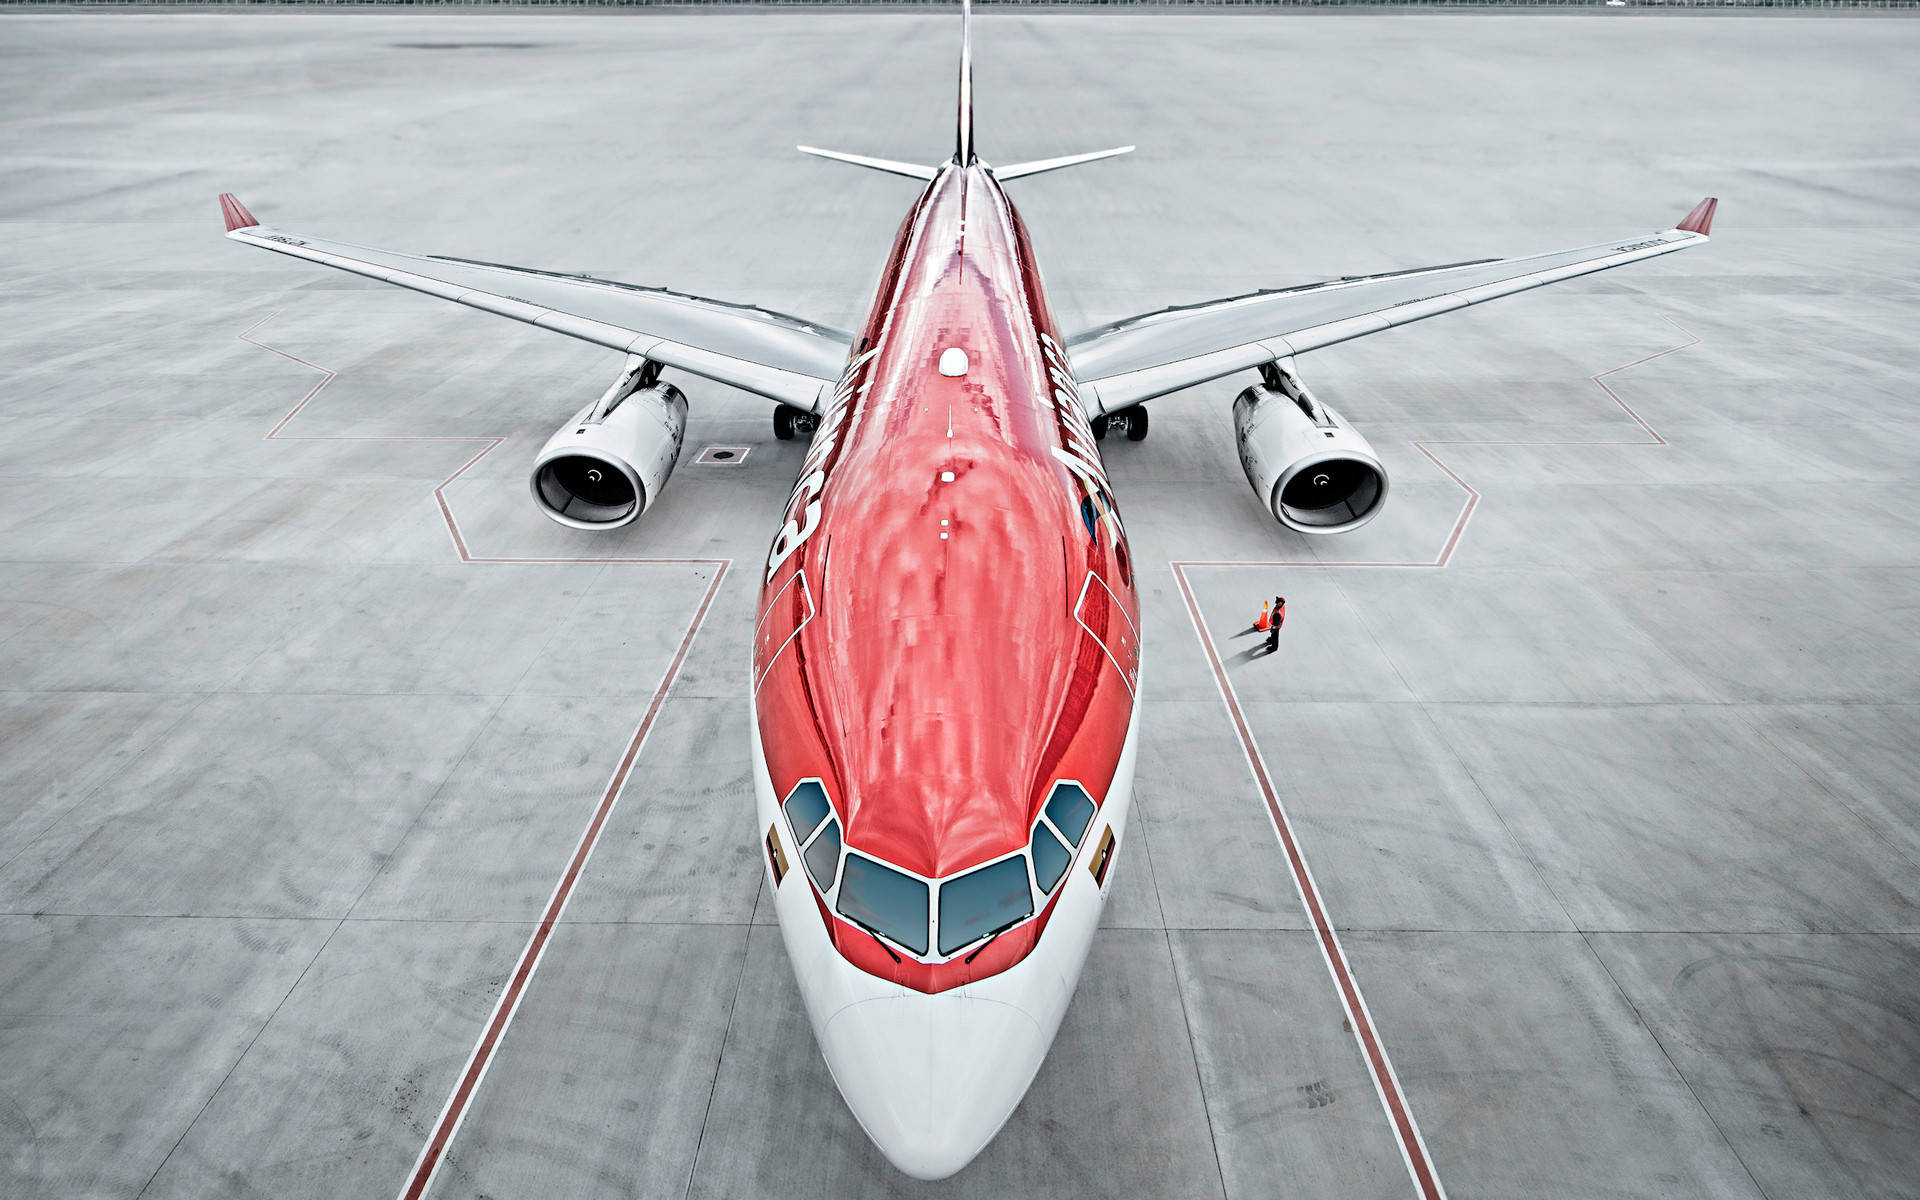 Avianca Airline Plane Viewed from Above Wallpaper